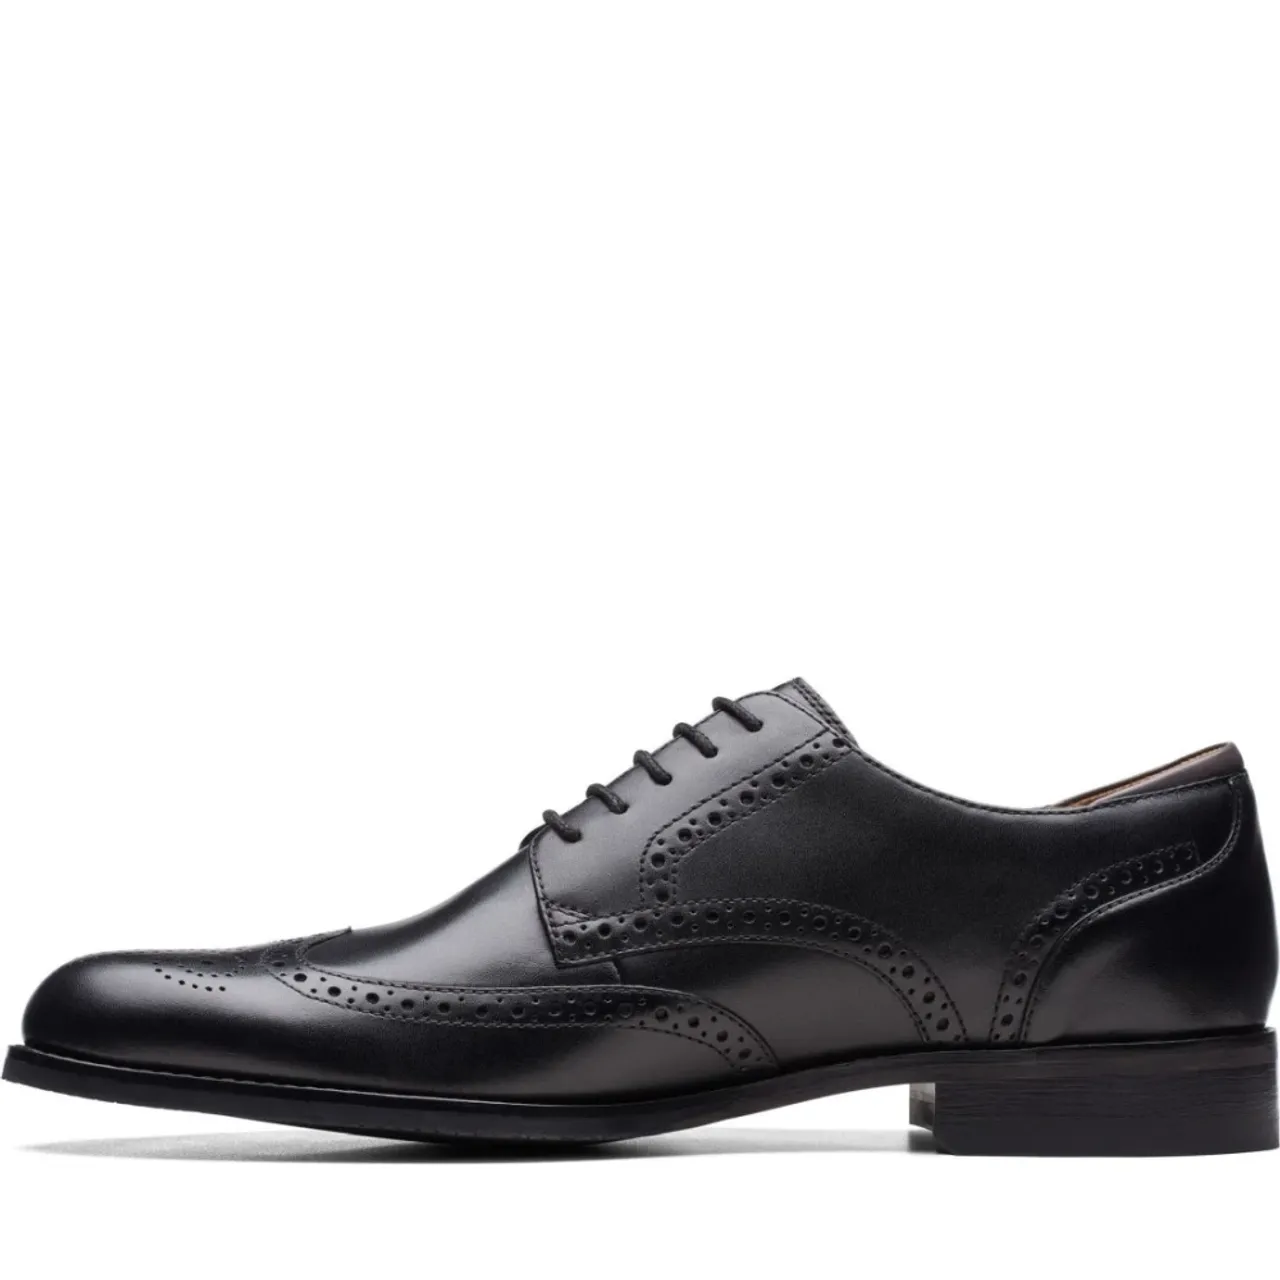 Clarks , Formal Business Shoes in Black ,Black male, Sizes: